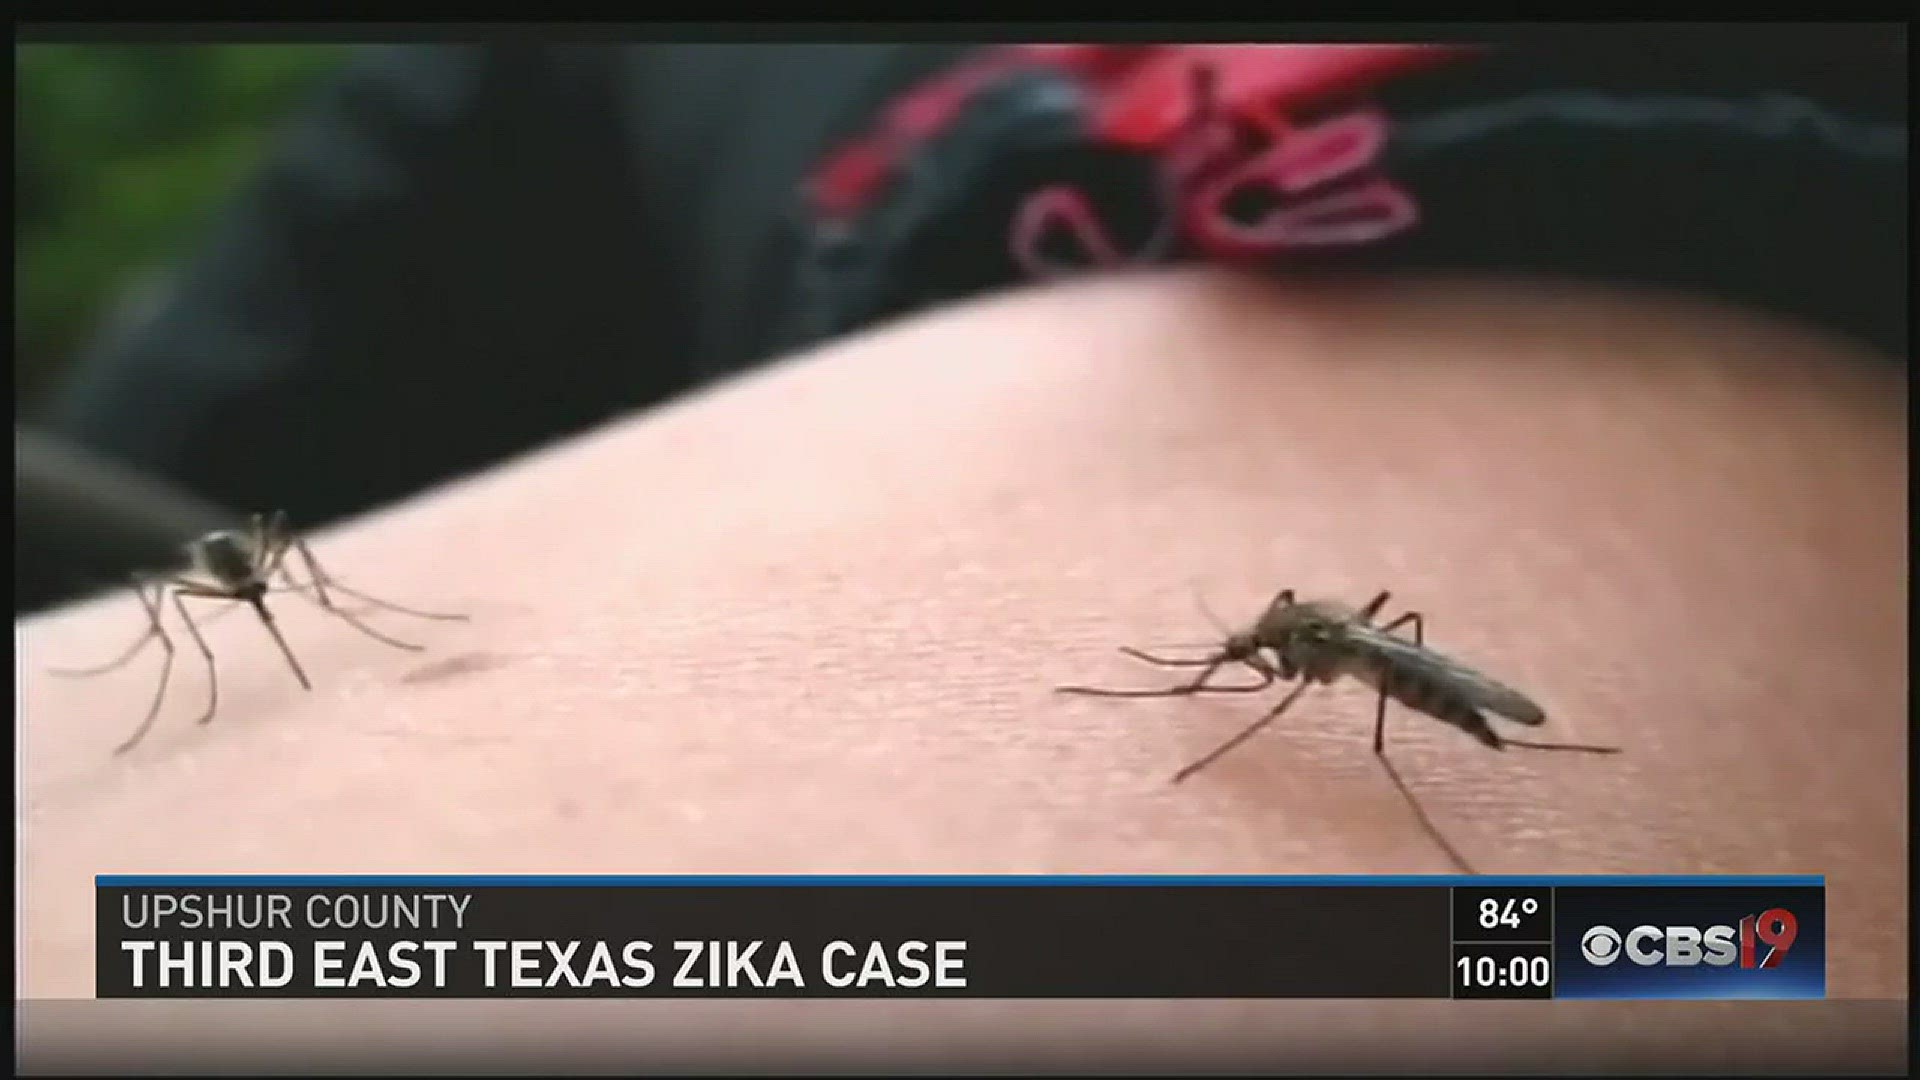 Upshur County has recorded its first case of Zika Virus.